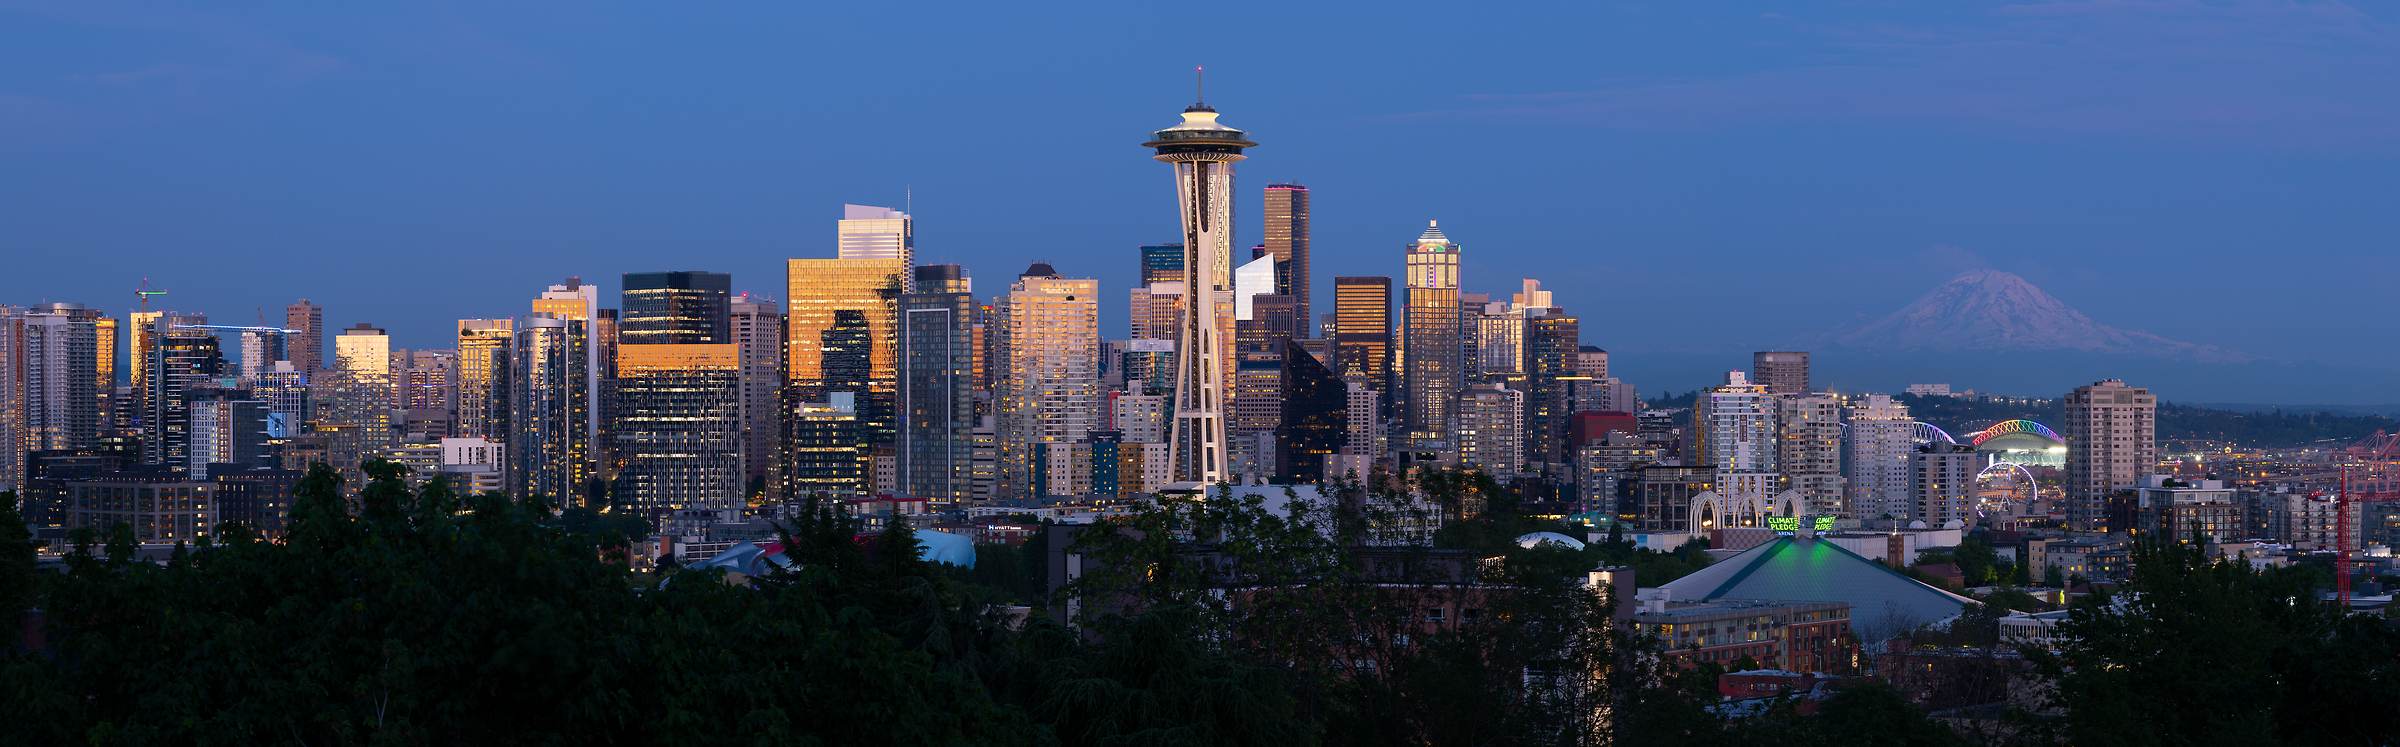 137 megapixels! A very high resolution, large-format VAST photo print of the Seattle skyline at dusk with Mt. Rainier in the background; cityscape photograph created by Greg Probst in Kerry Park, Seattle, Washington.